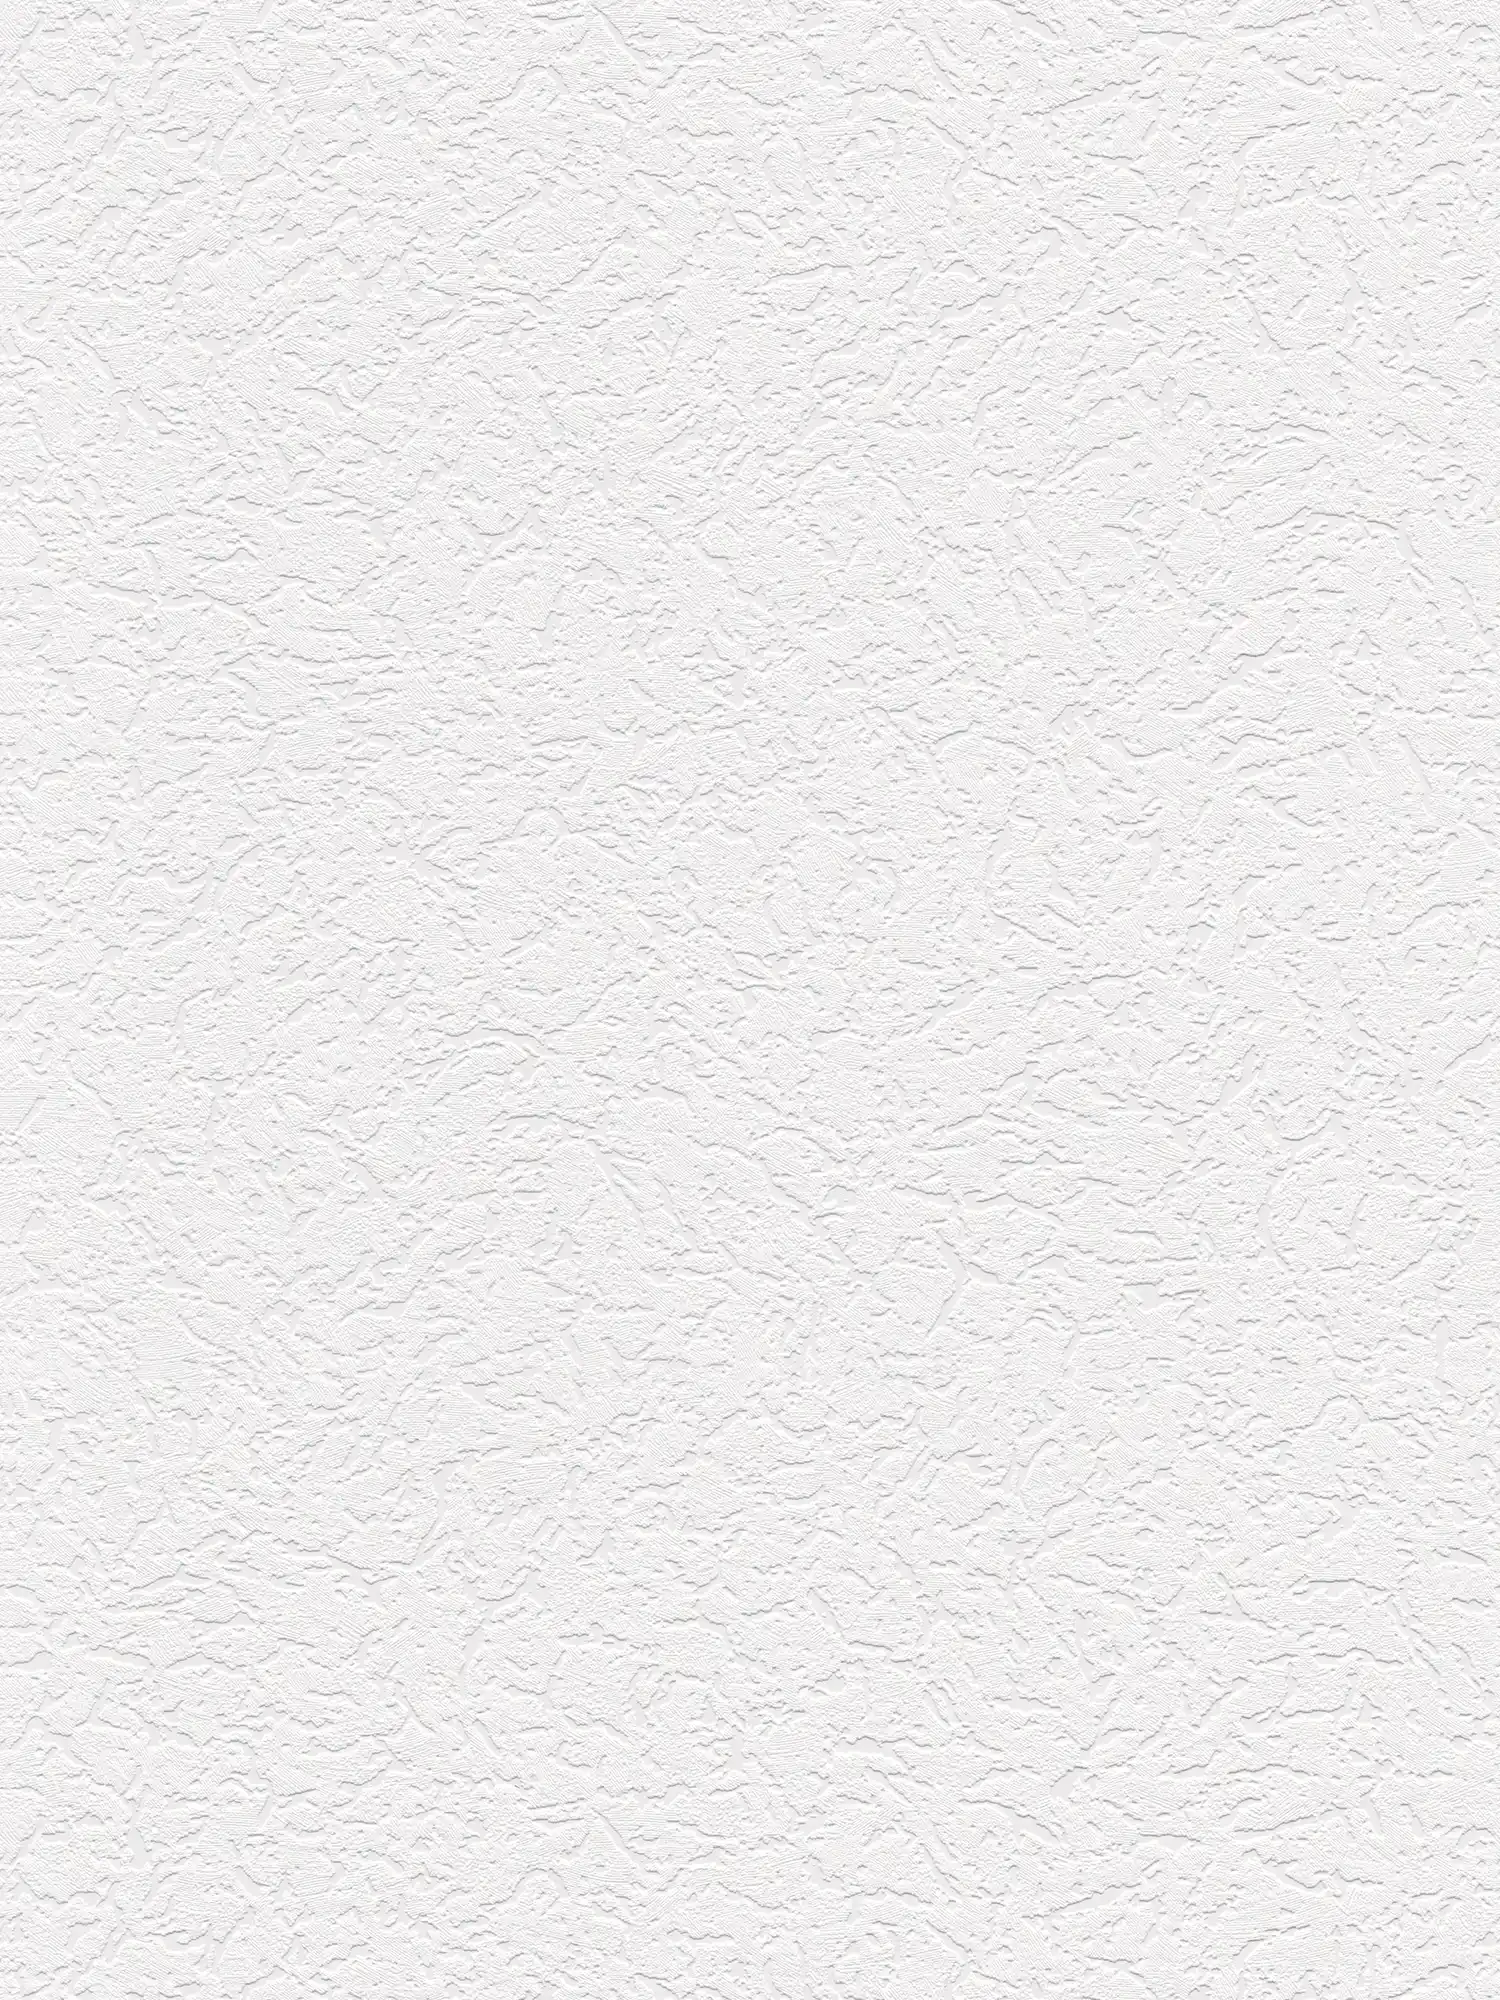 Rough plaster wallpaper with texture pattern classic design - white
